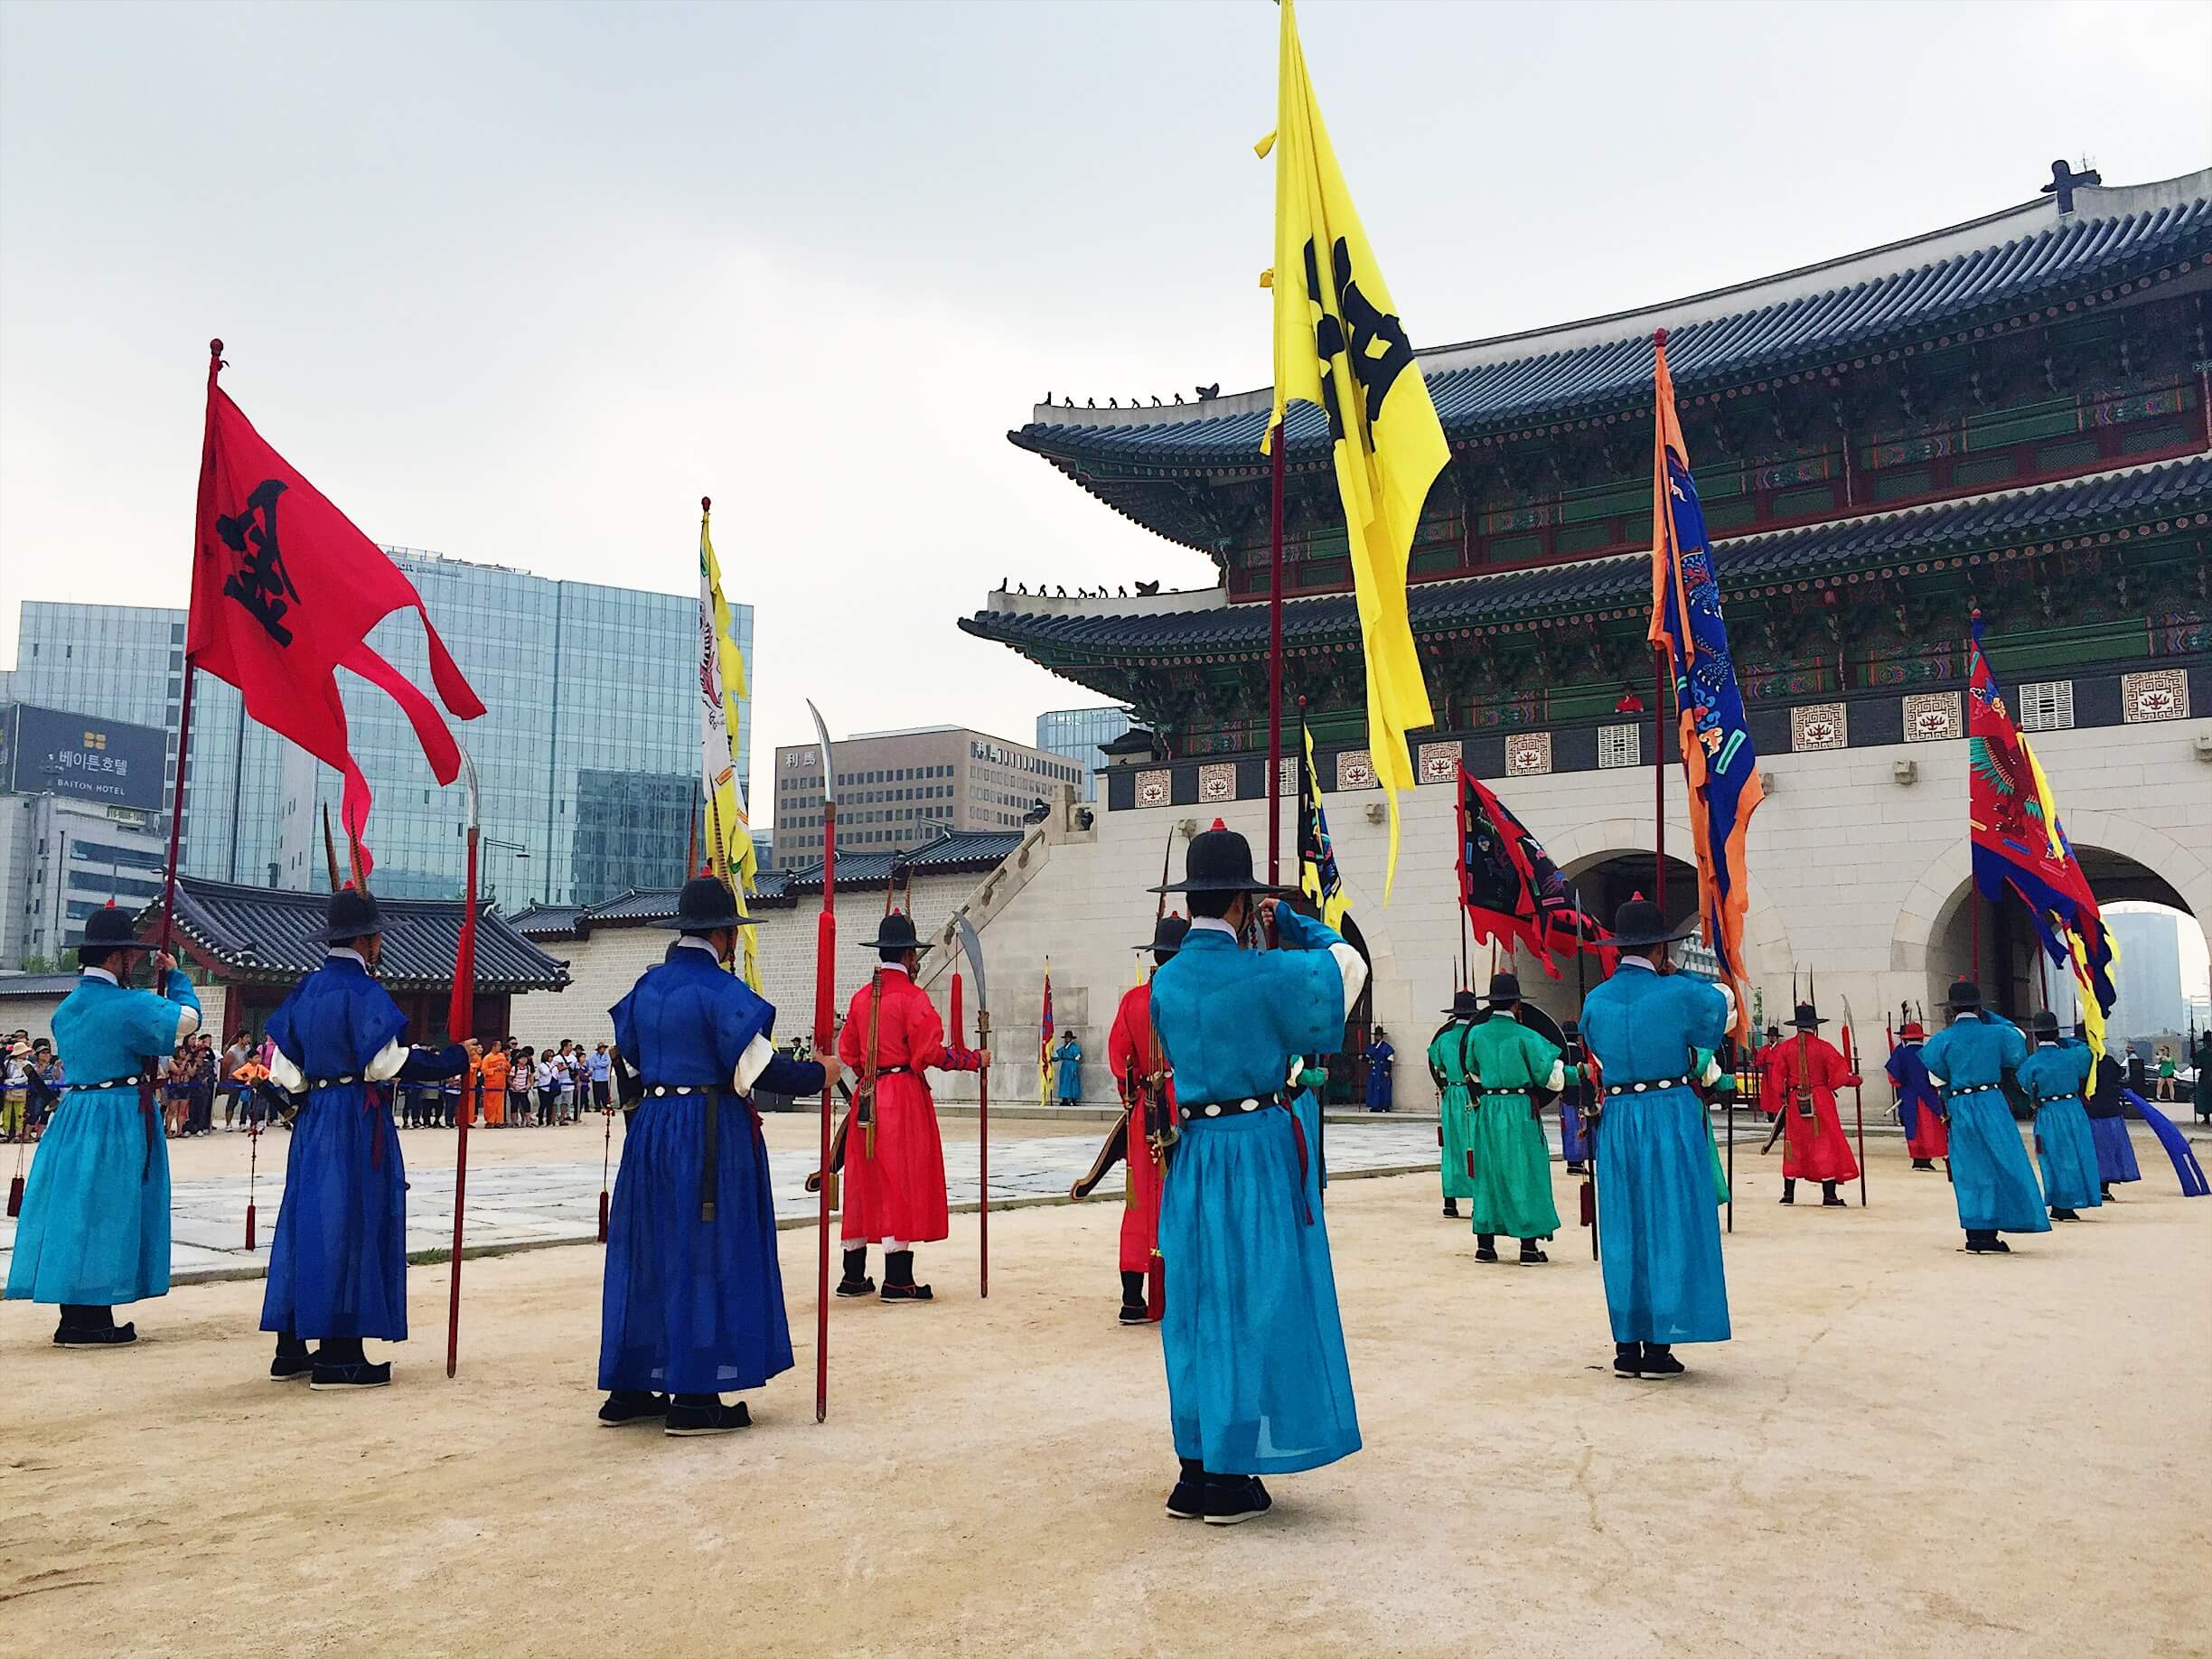 Outside Gyeongbokgung
              Palace, there are guards wearing colored clothing and holding
              up colored flags.